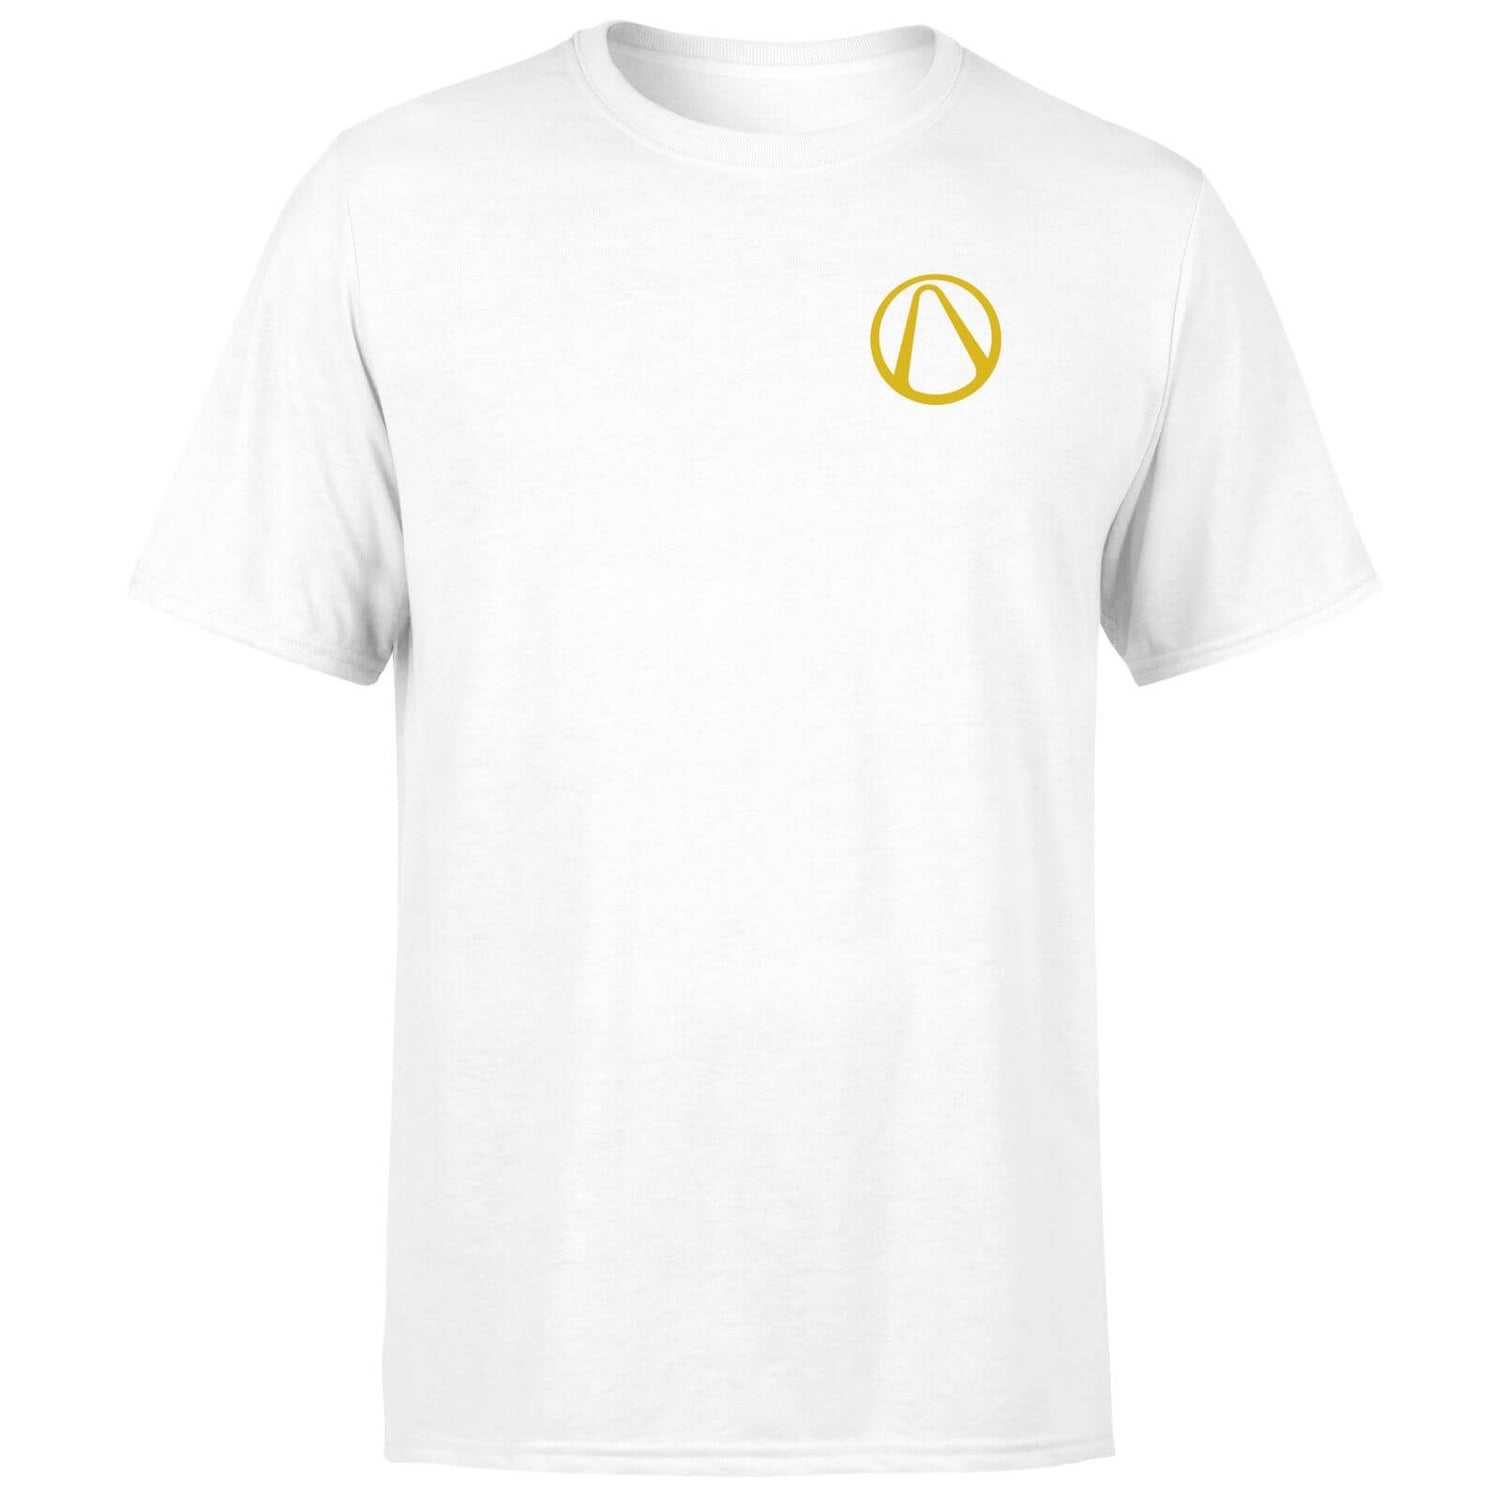 New Tales From The Borderlands Octavio Unisex T-Shirt - White